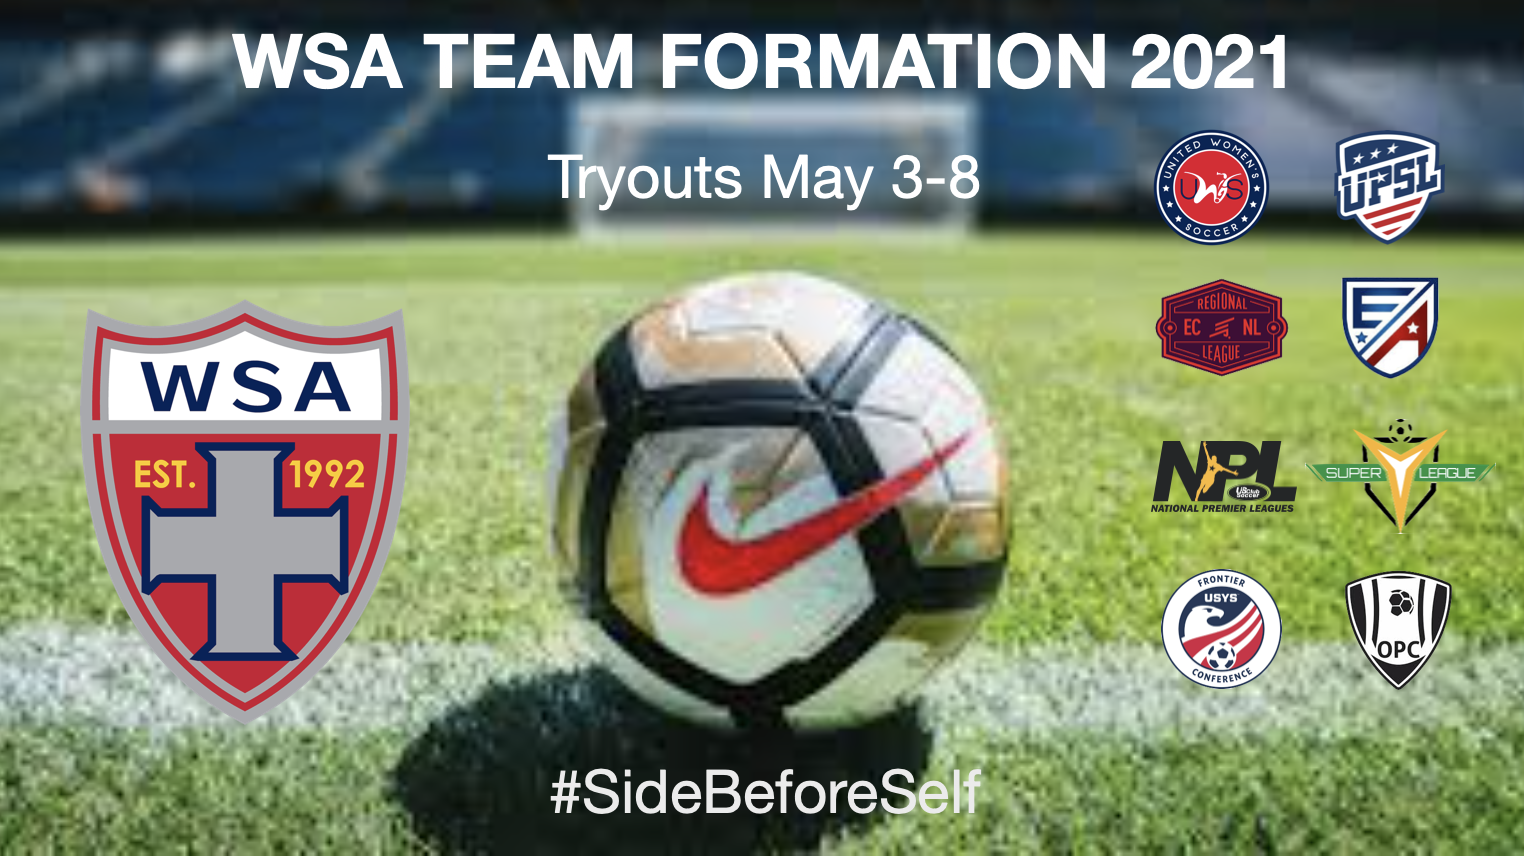 2021-22 WSA TEAM FORMATION INFO POSTED